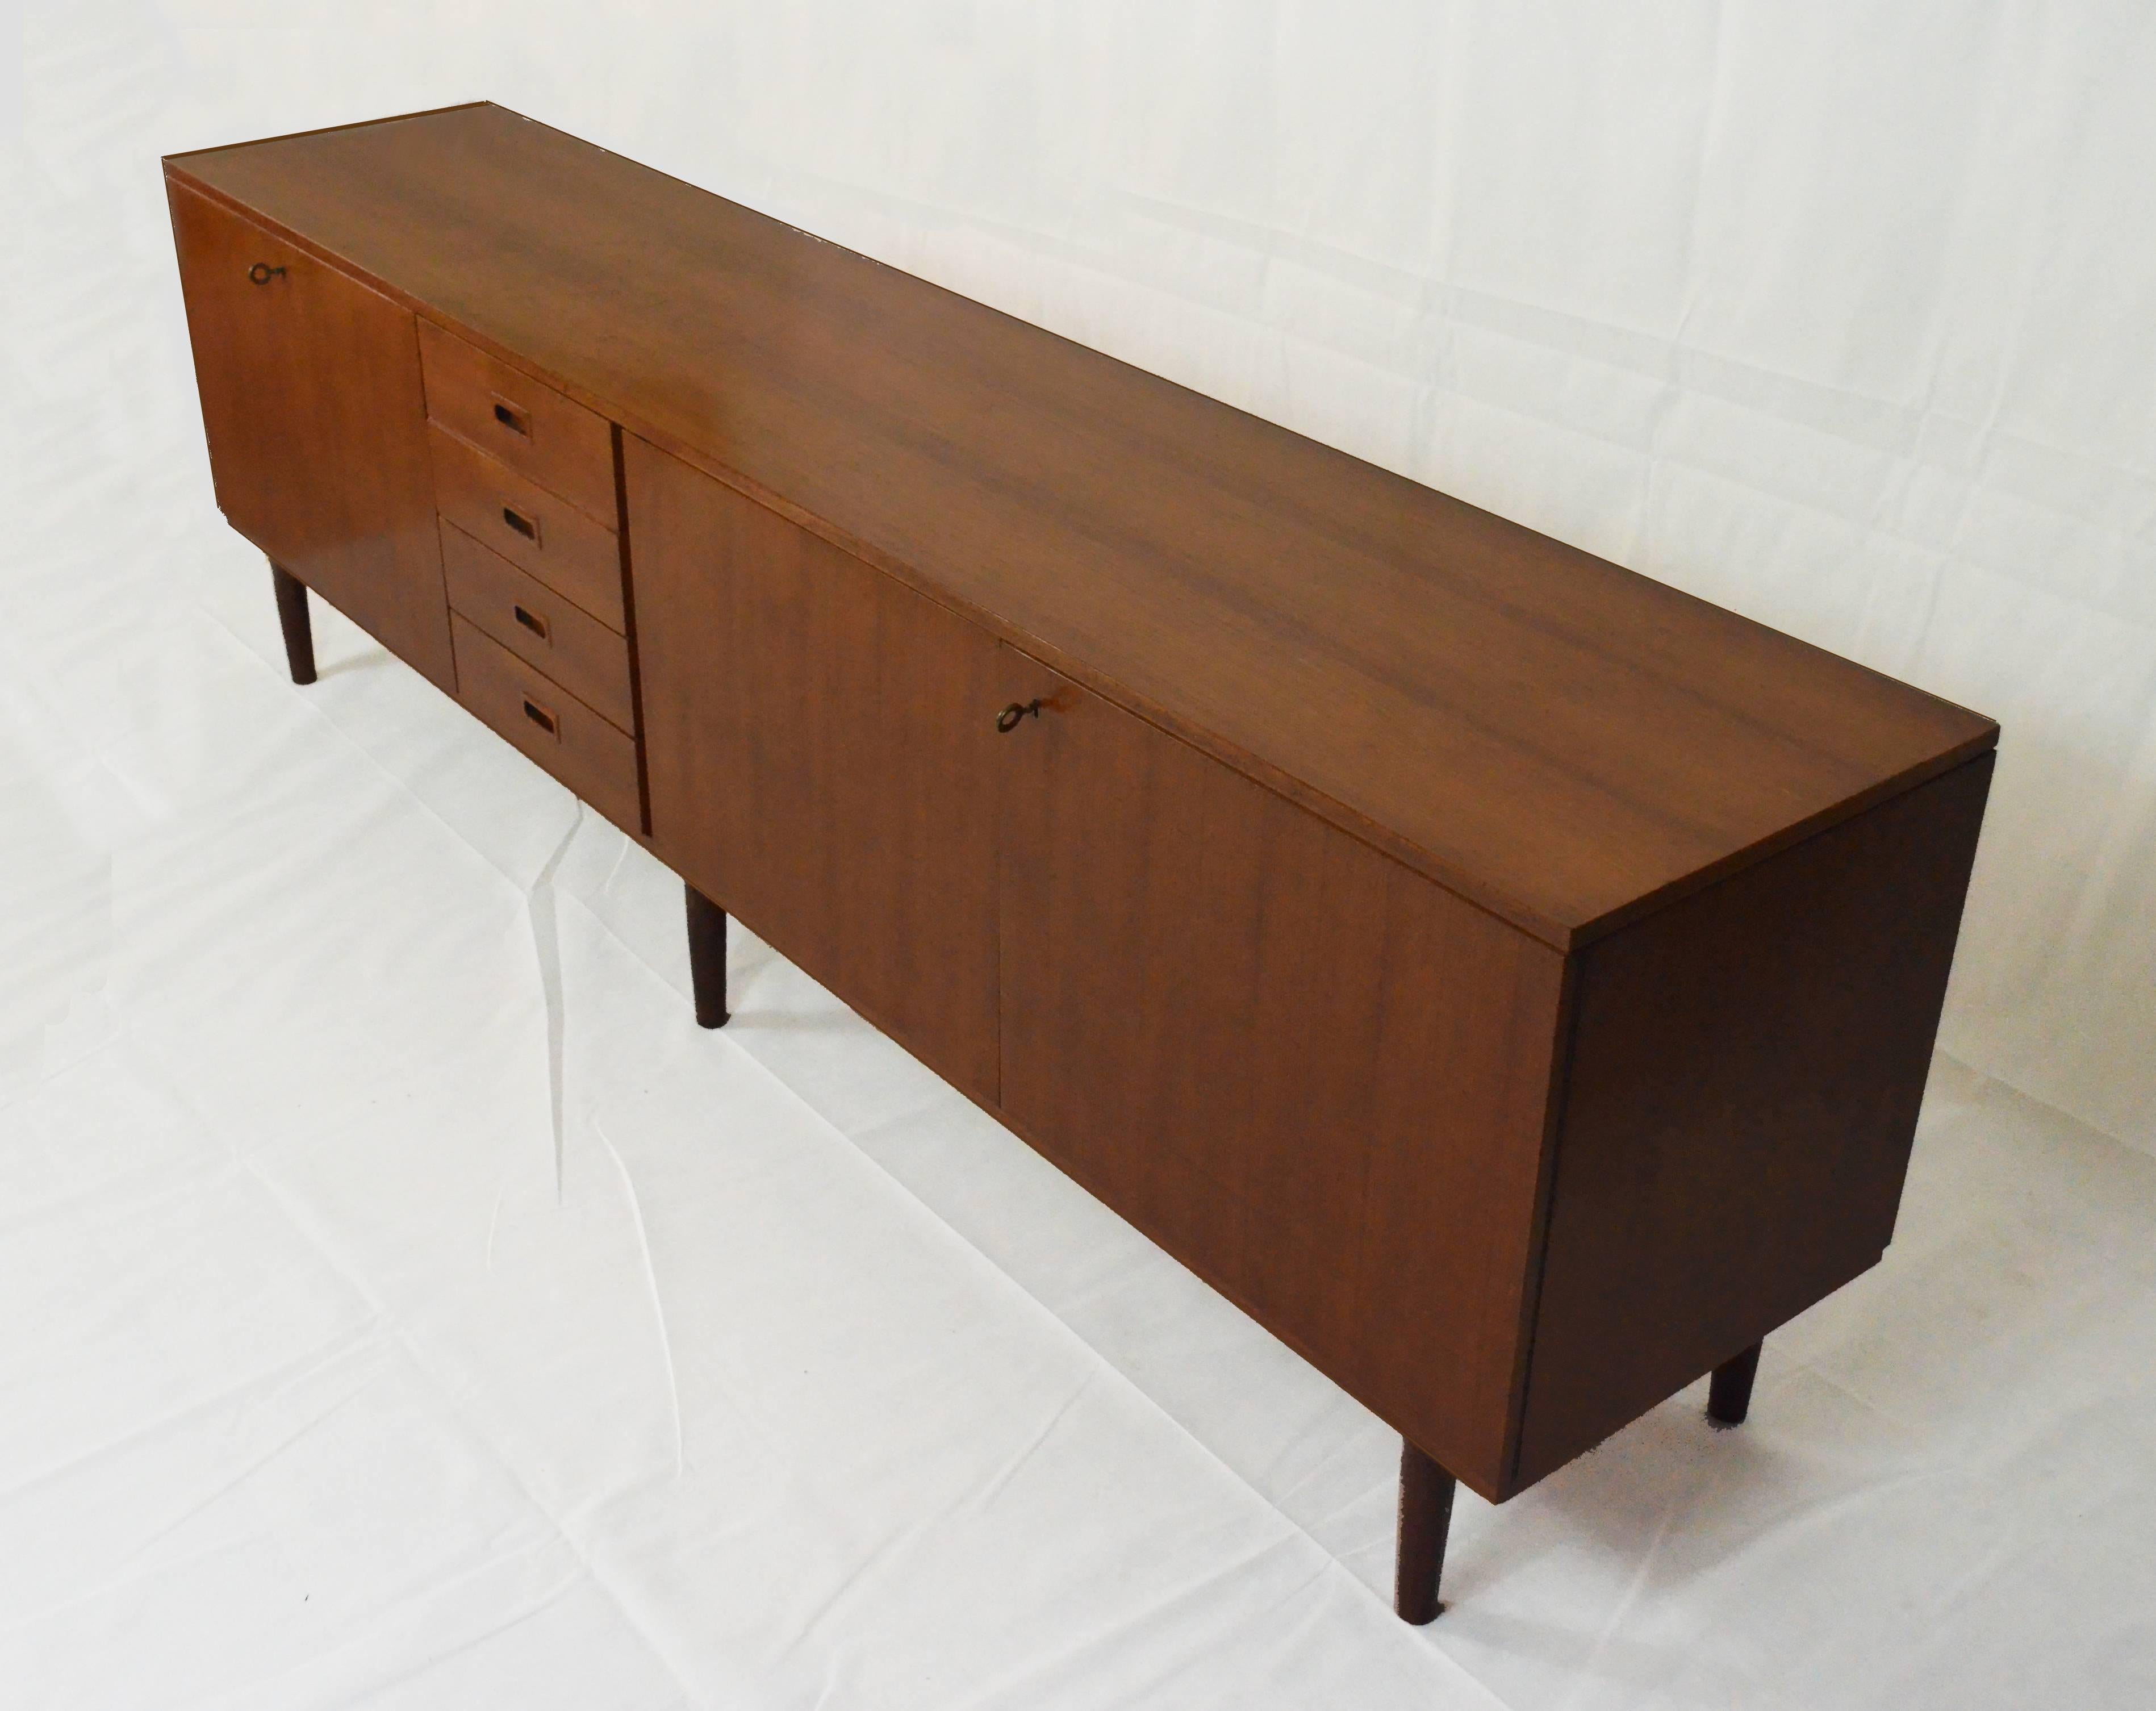 A 1960s teak wood sideboard marked “IMA mobili Vicenza”. Two doors  on the right side, four identical central drawers, and one leaf door on the left side.
The sideboard is in excellent conditions, with some minor details coherent with prior use. No